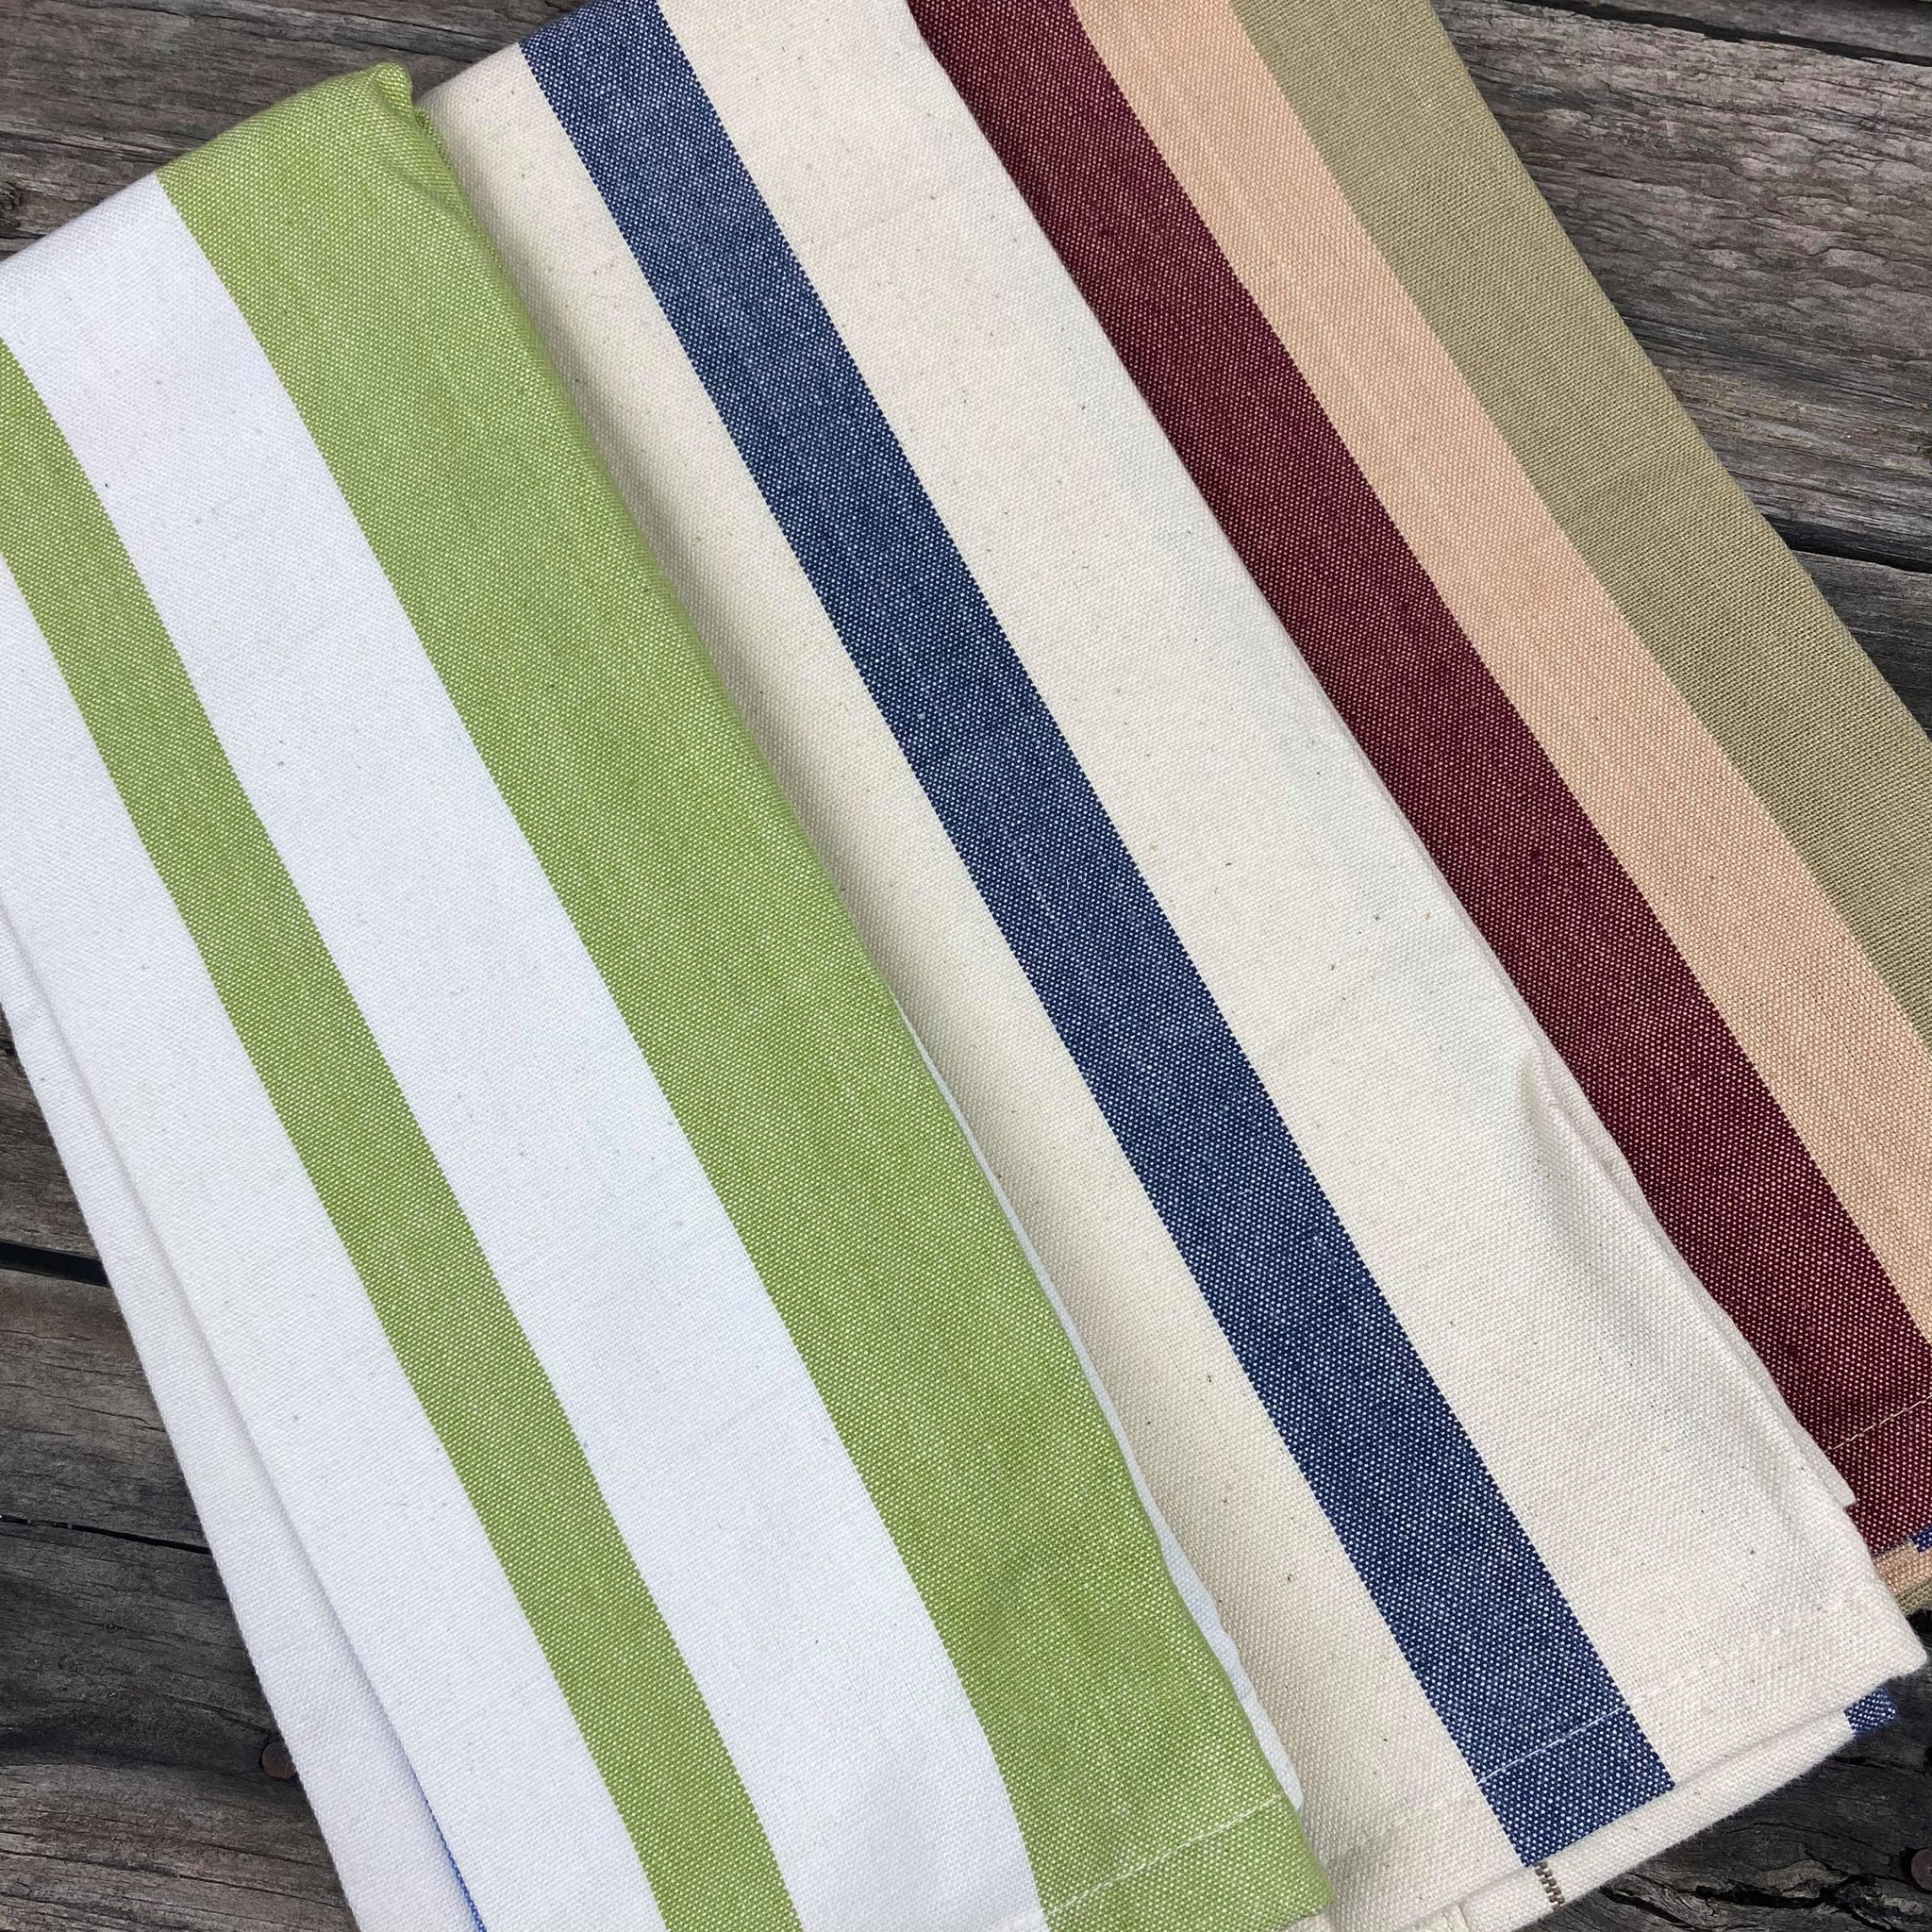 Fair trade ethical handwoven striped cotton tea towels in green, blue and a maroon, beige and green colouring 